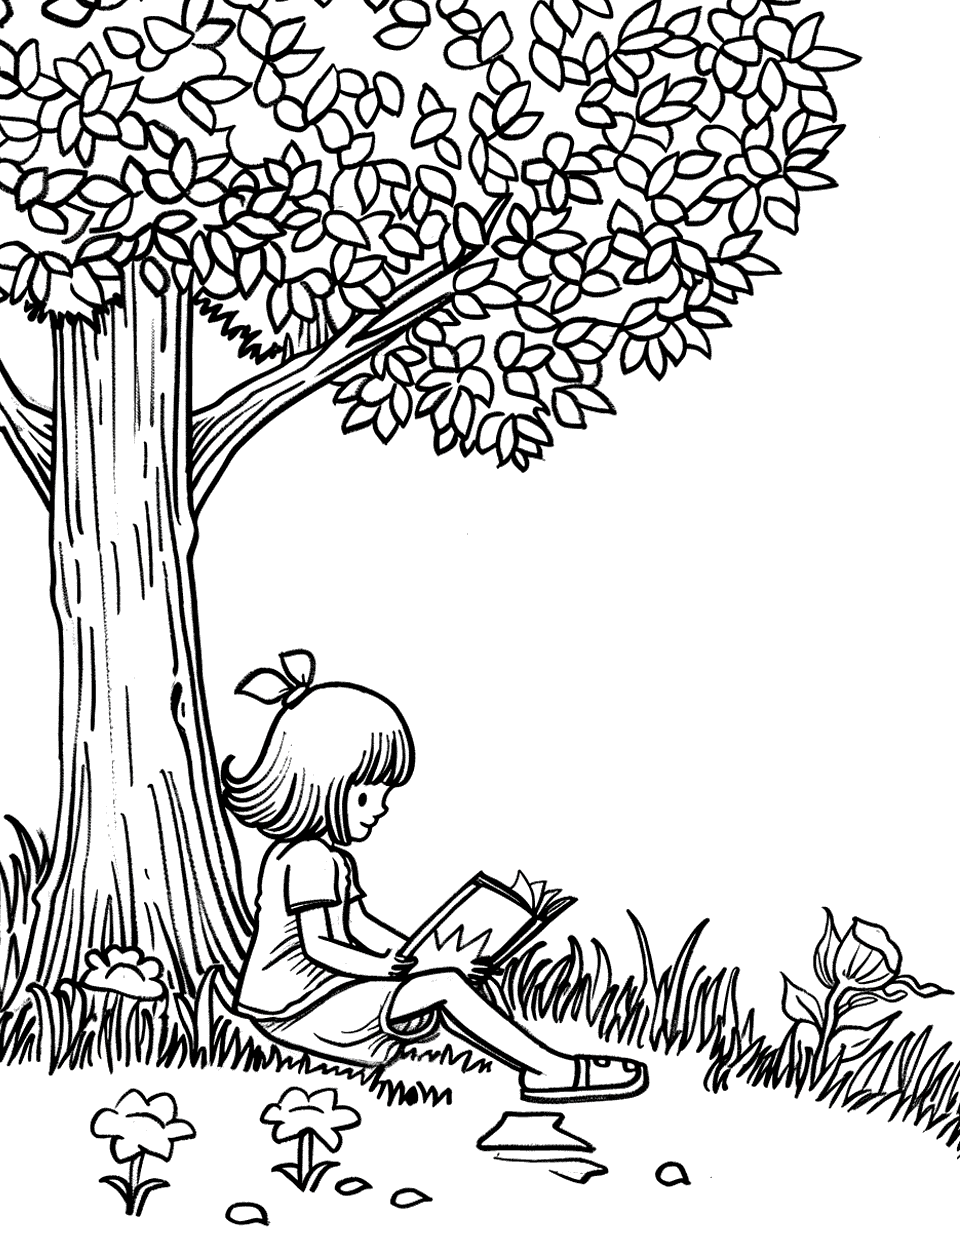 Reading Under a Tree Garden Coloring Page - A young girl reading a book under the shade of a large tree in a serene garden.